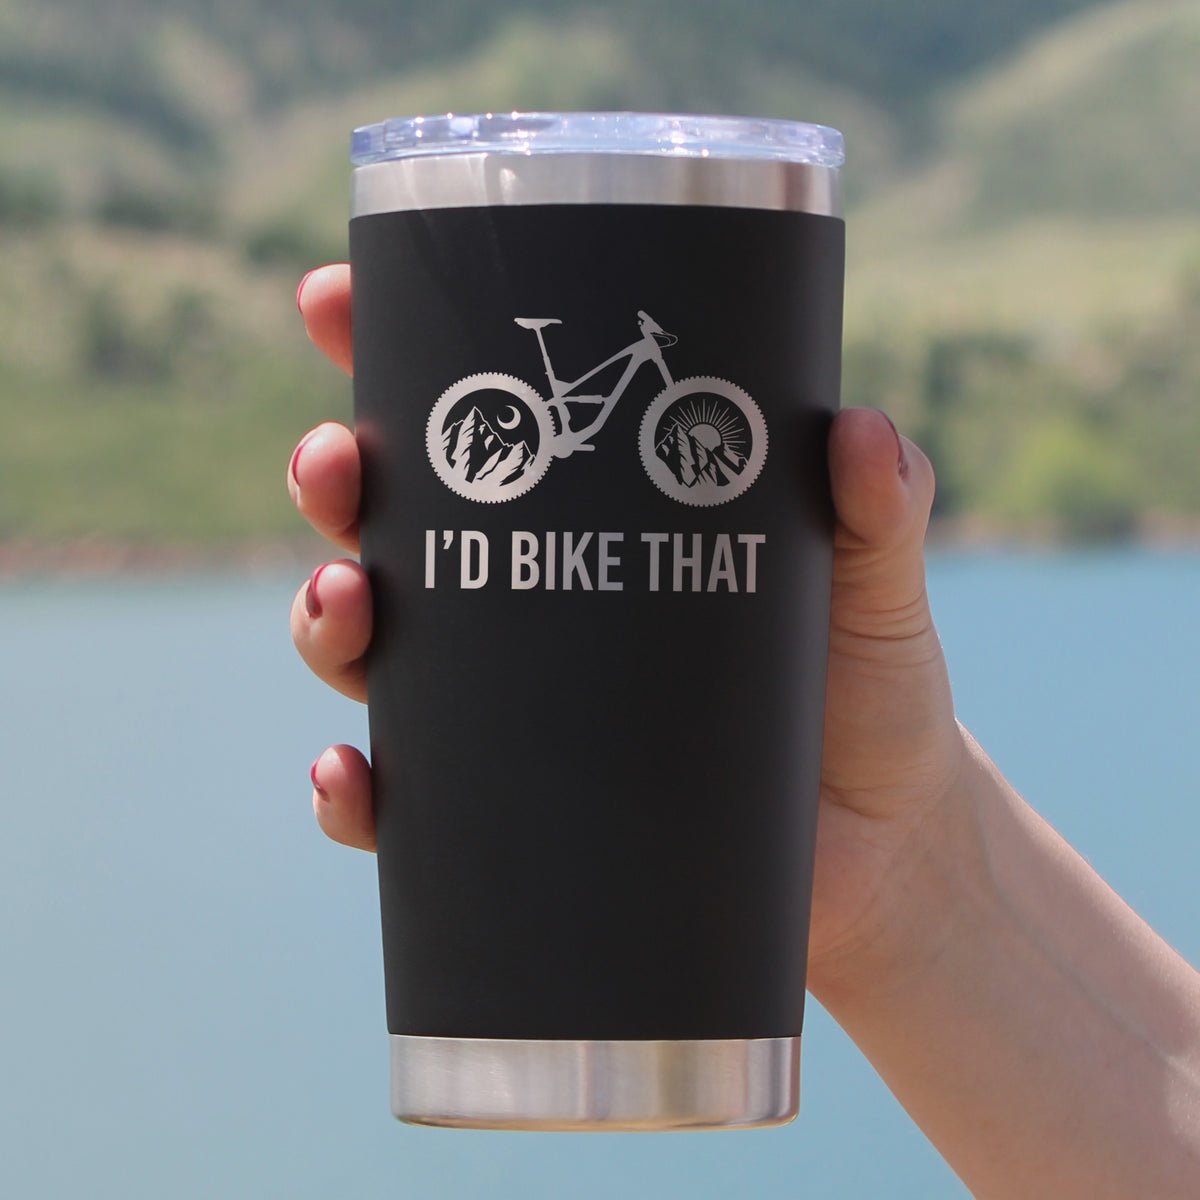 I&#39;d Bike That - Insulated Coffee Tumbler Cup with Sliding Lid - Stainless Steel Insulated Mug - Cool Bicycle Themed Decor and Gifts for Mountain Bikers